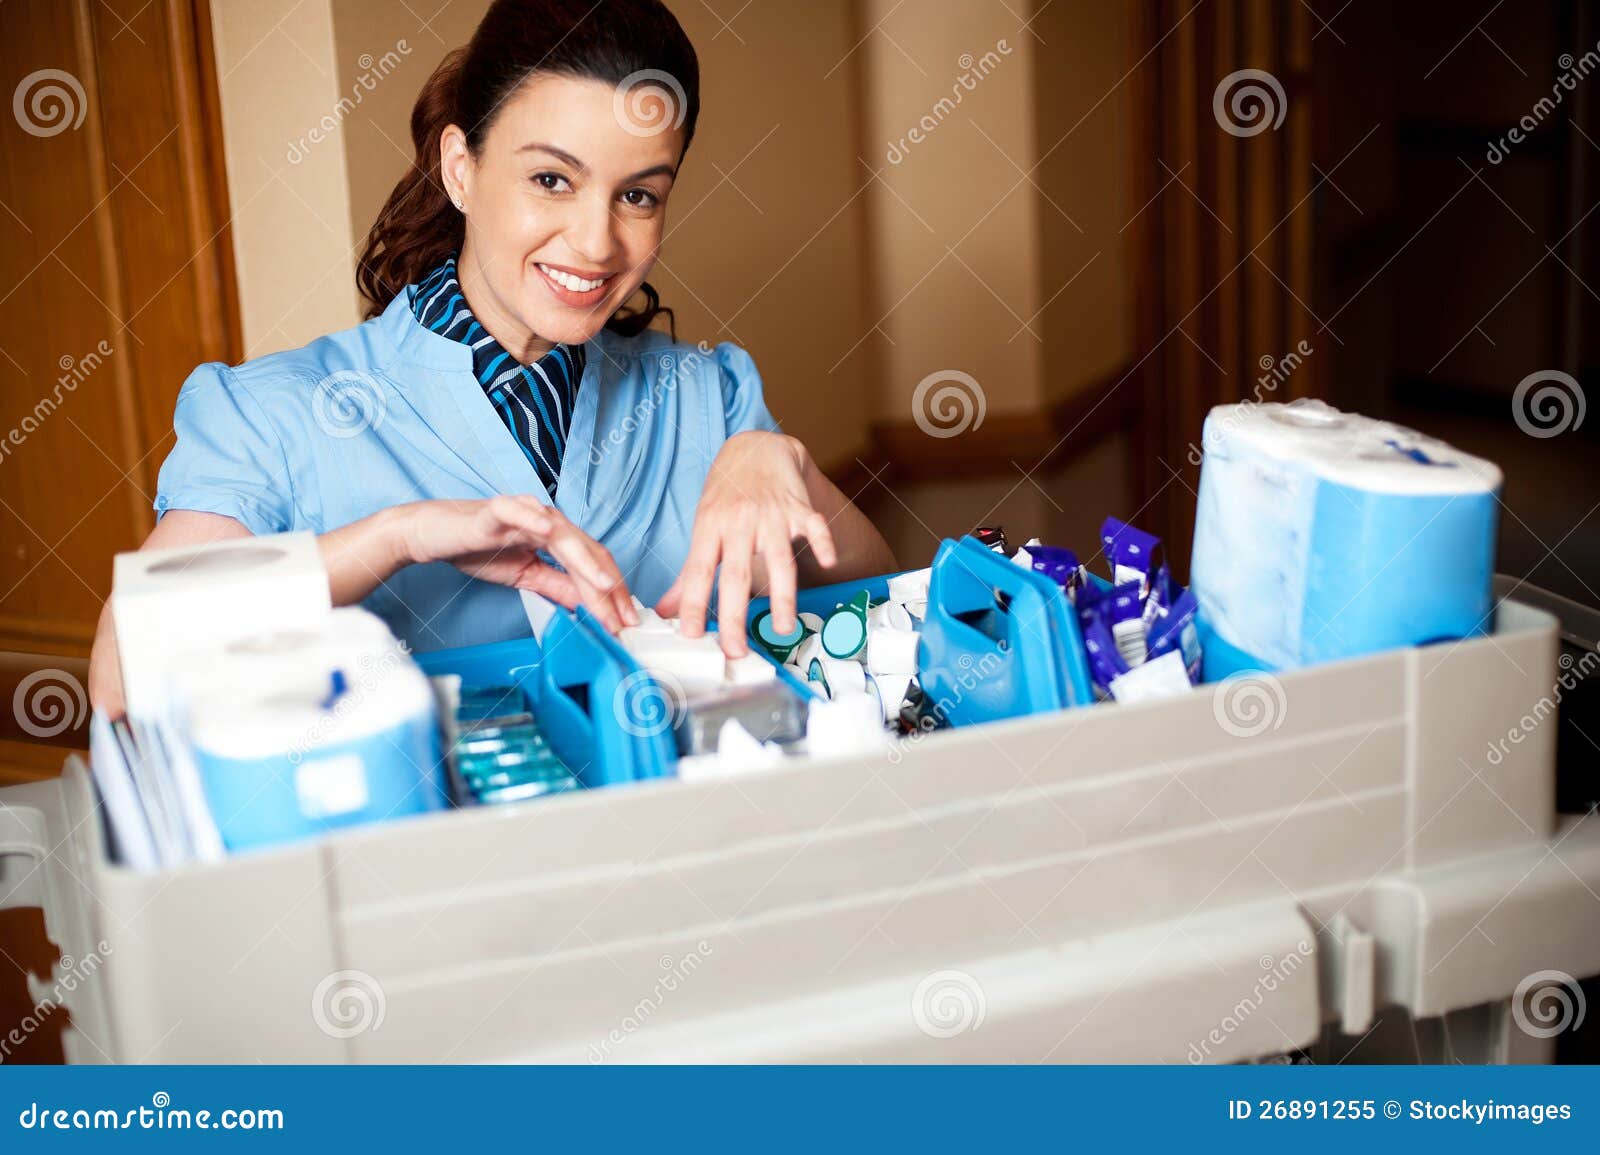 working staff arranging toiletries in a wheel cart